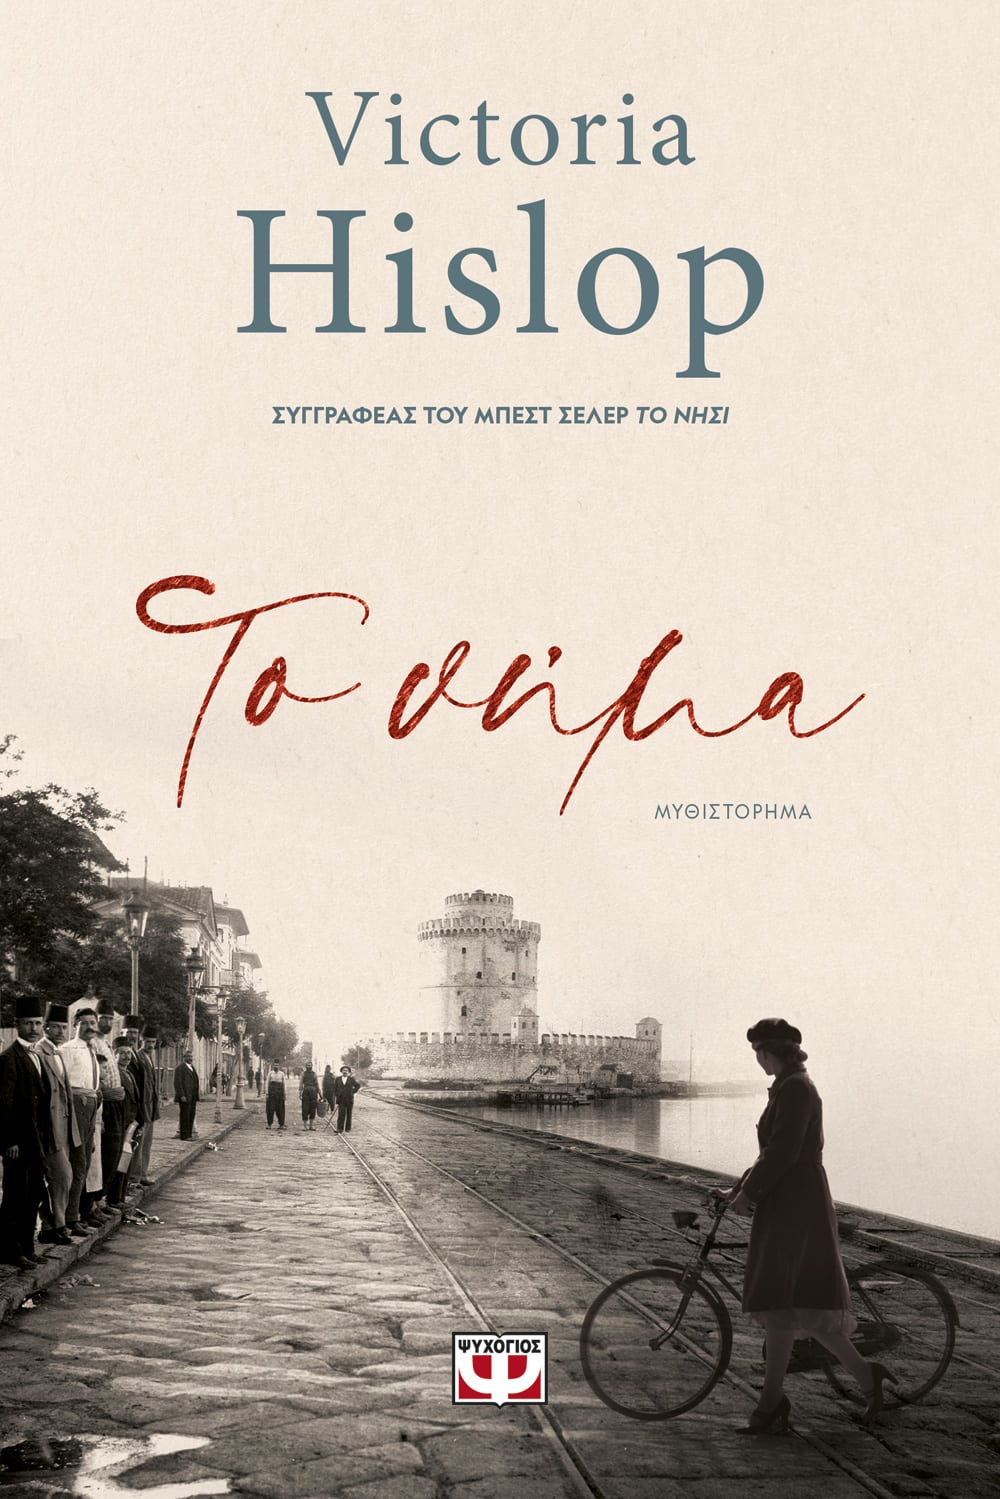 Special Offer: Any 2 Victoria Hislop titles in modern Greek at 10% off!